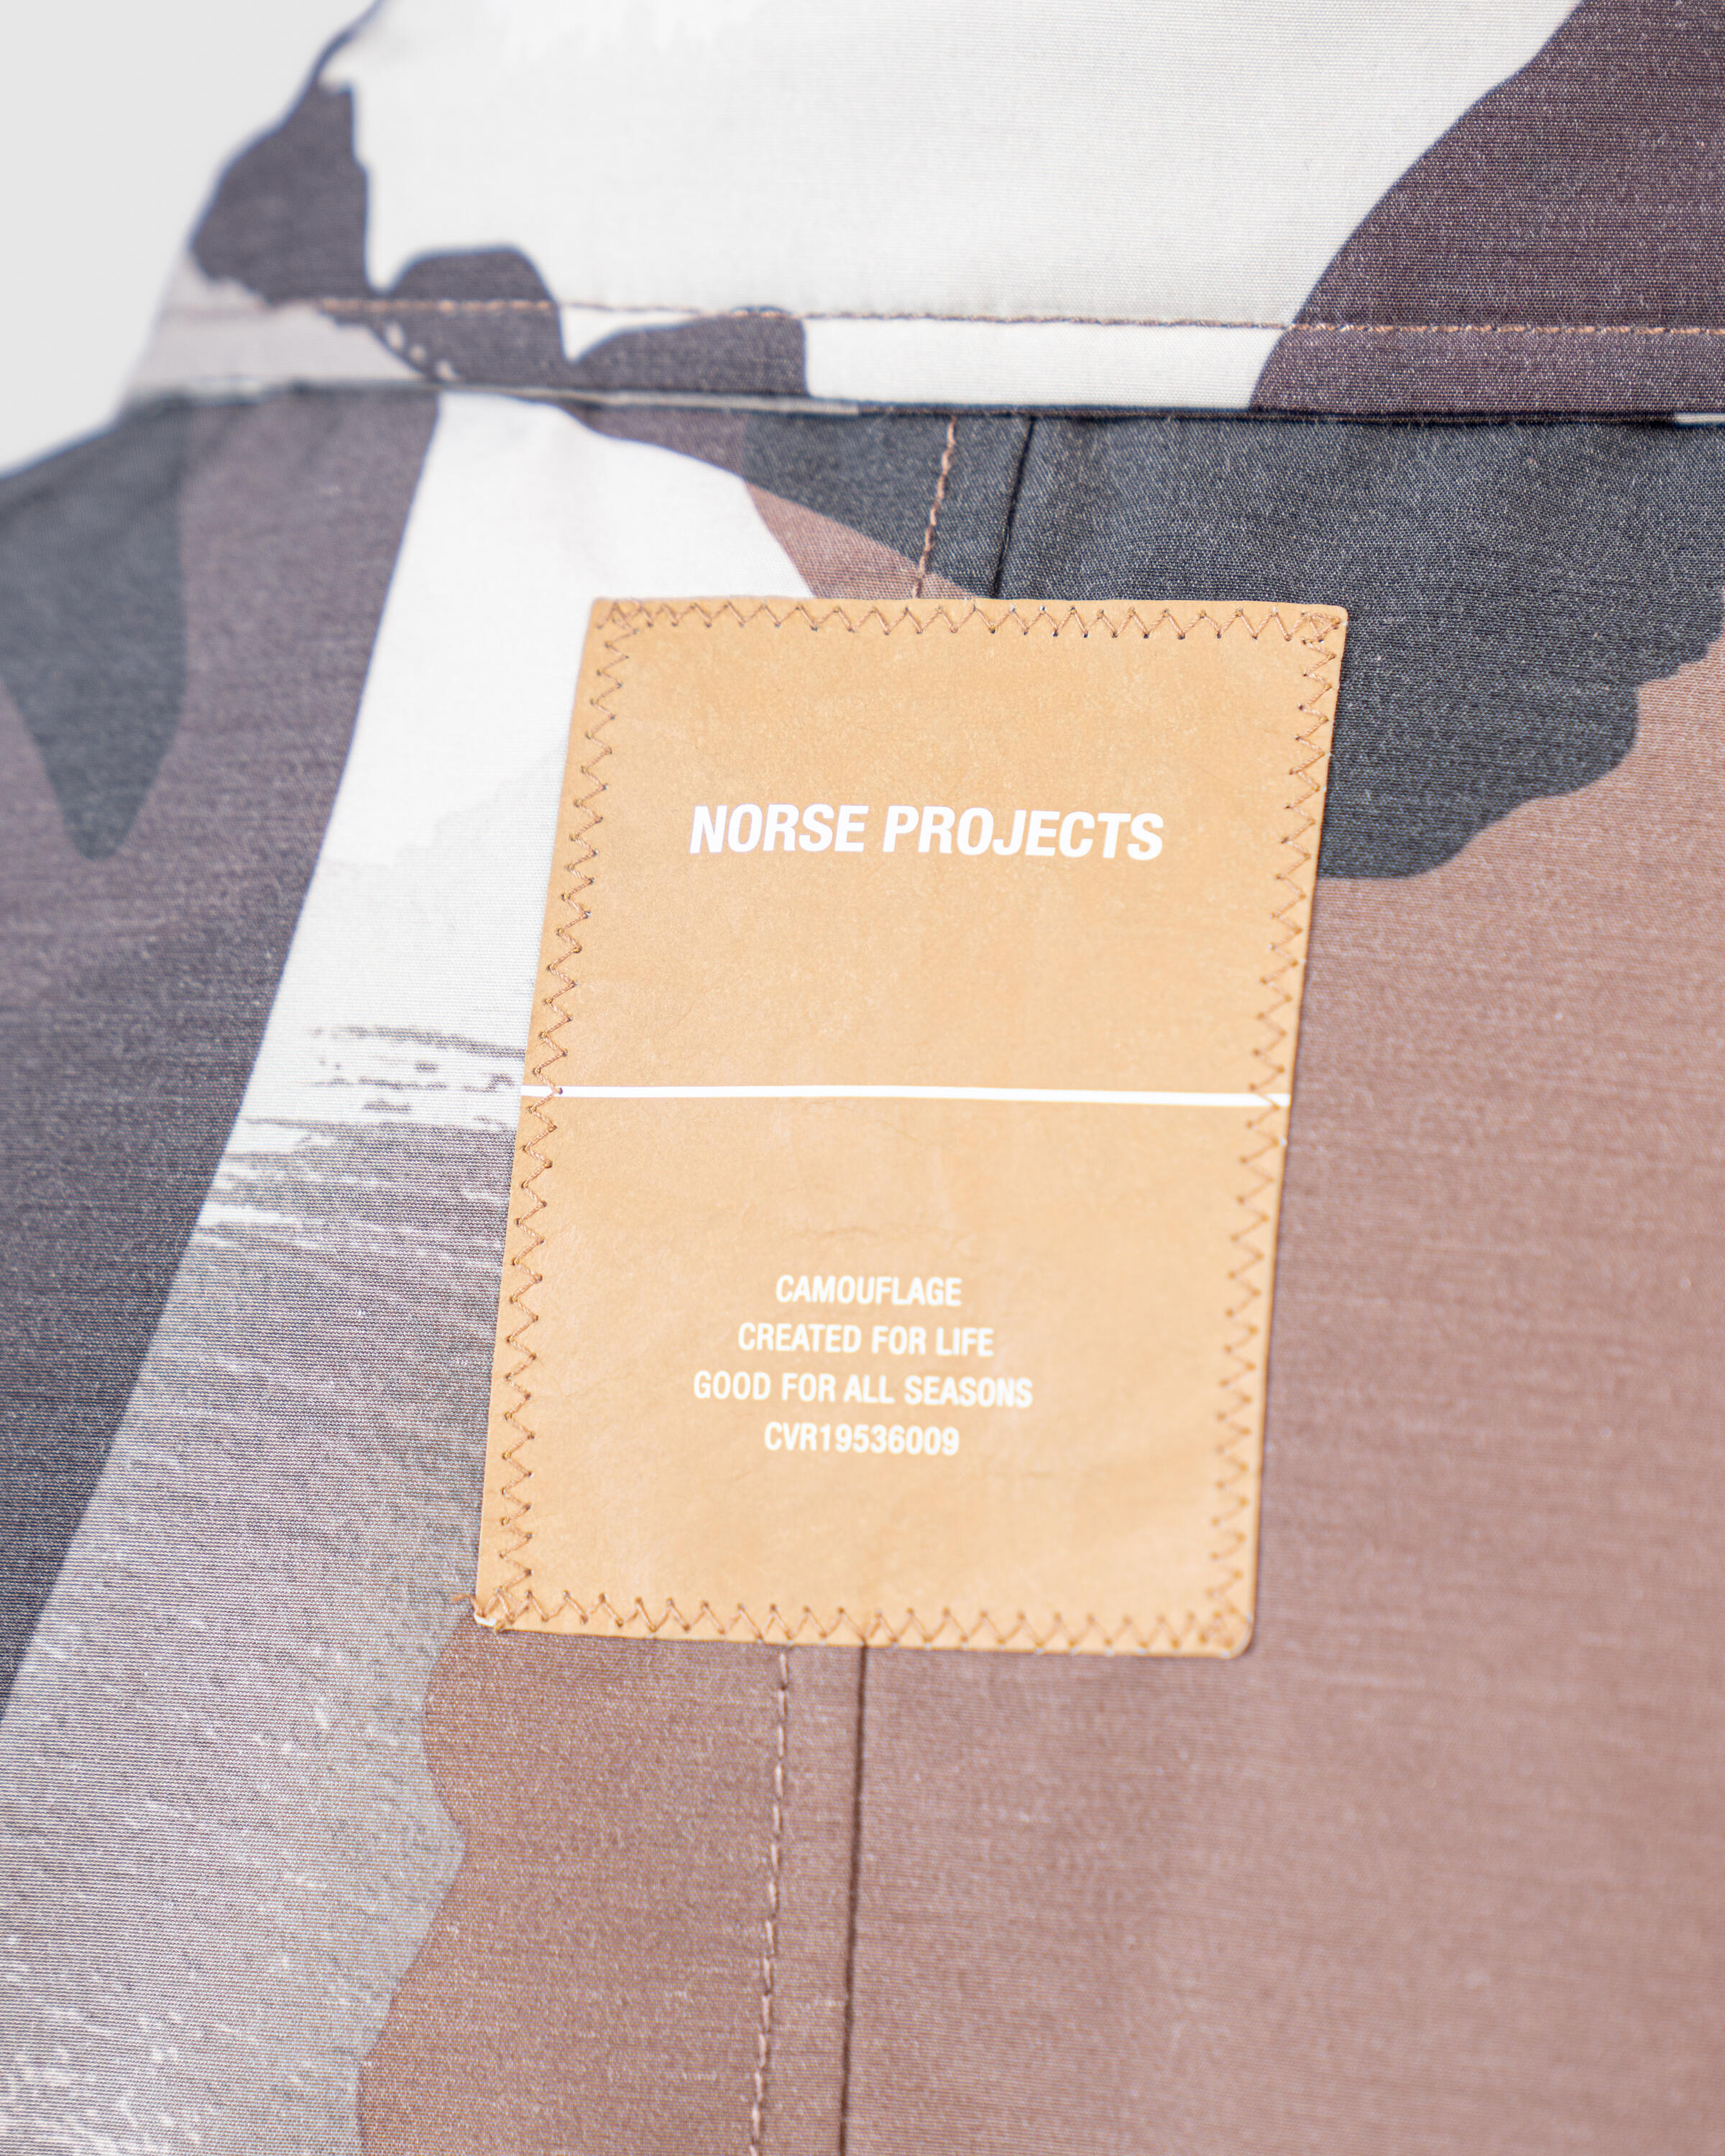 Norse Projects Pelle Camo Insulated Jacket